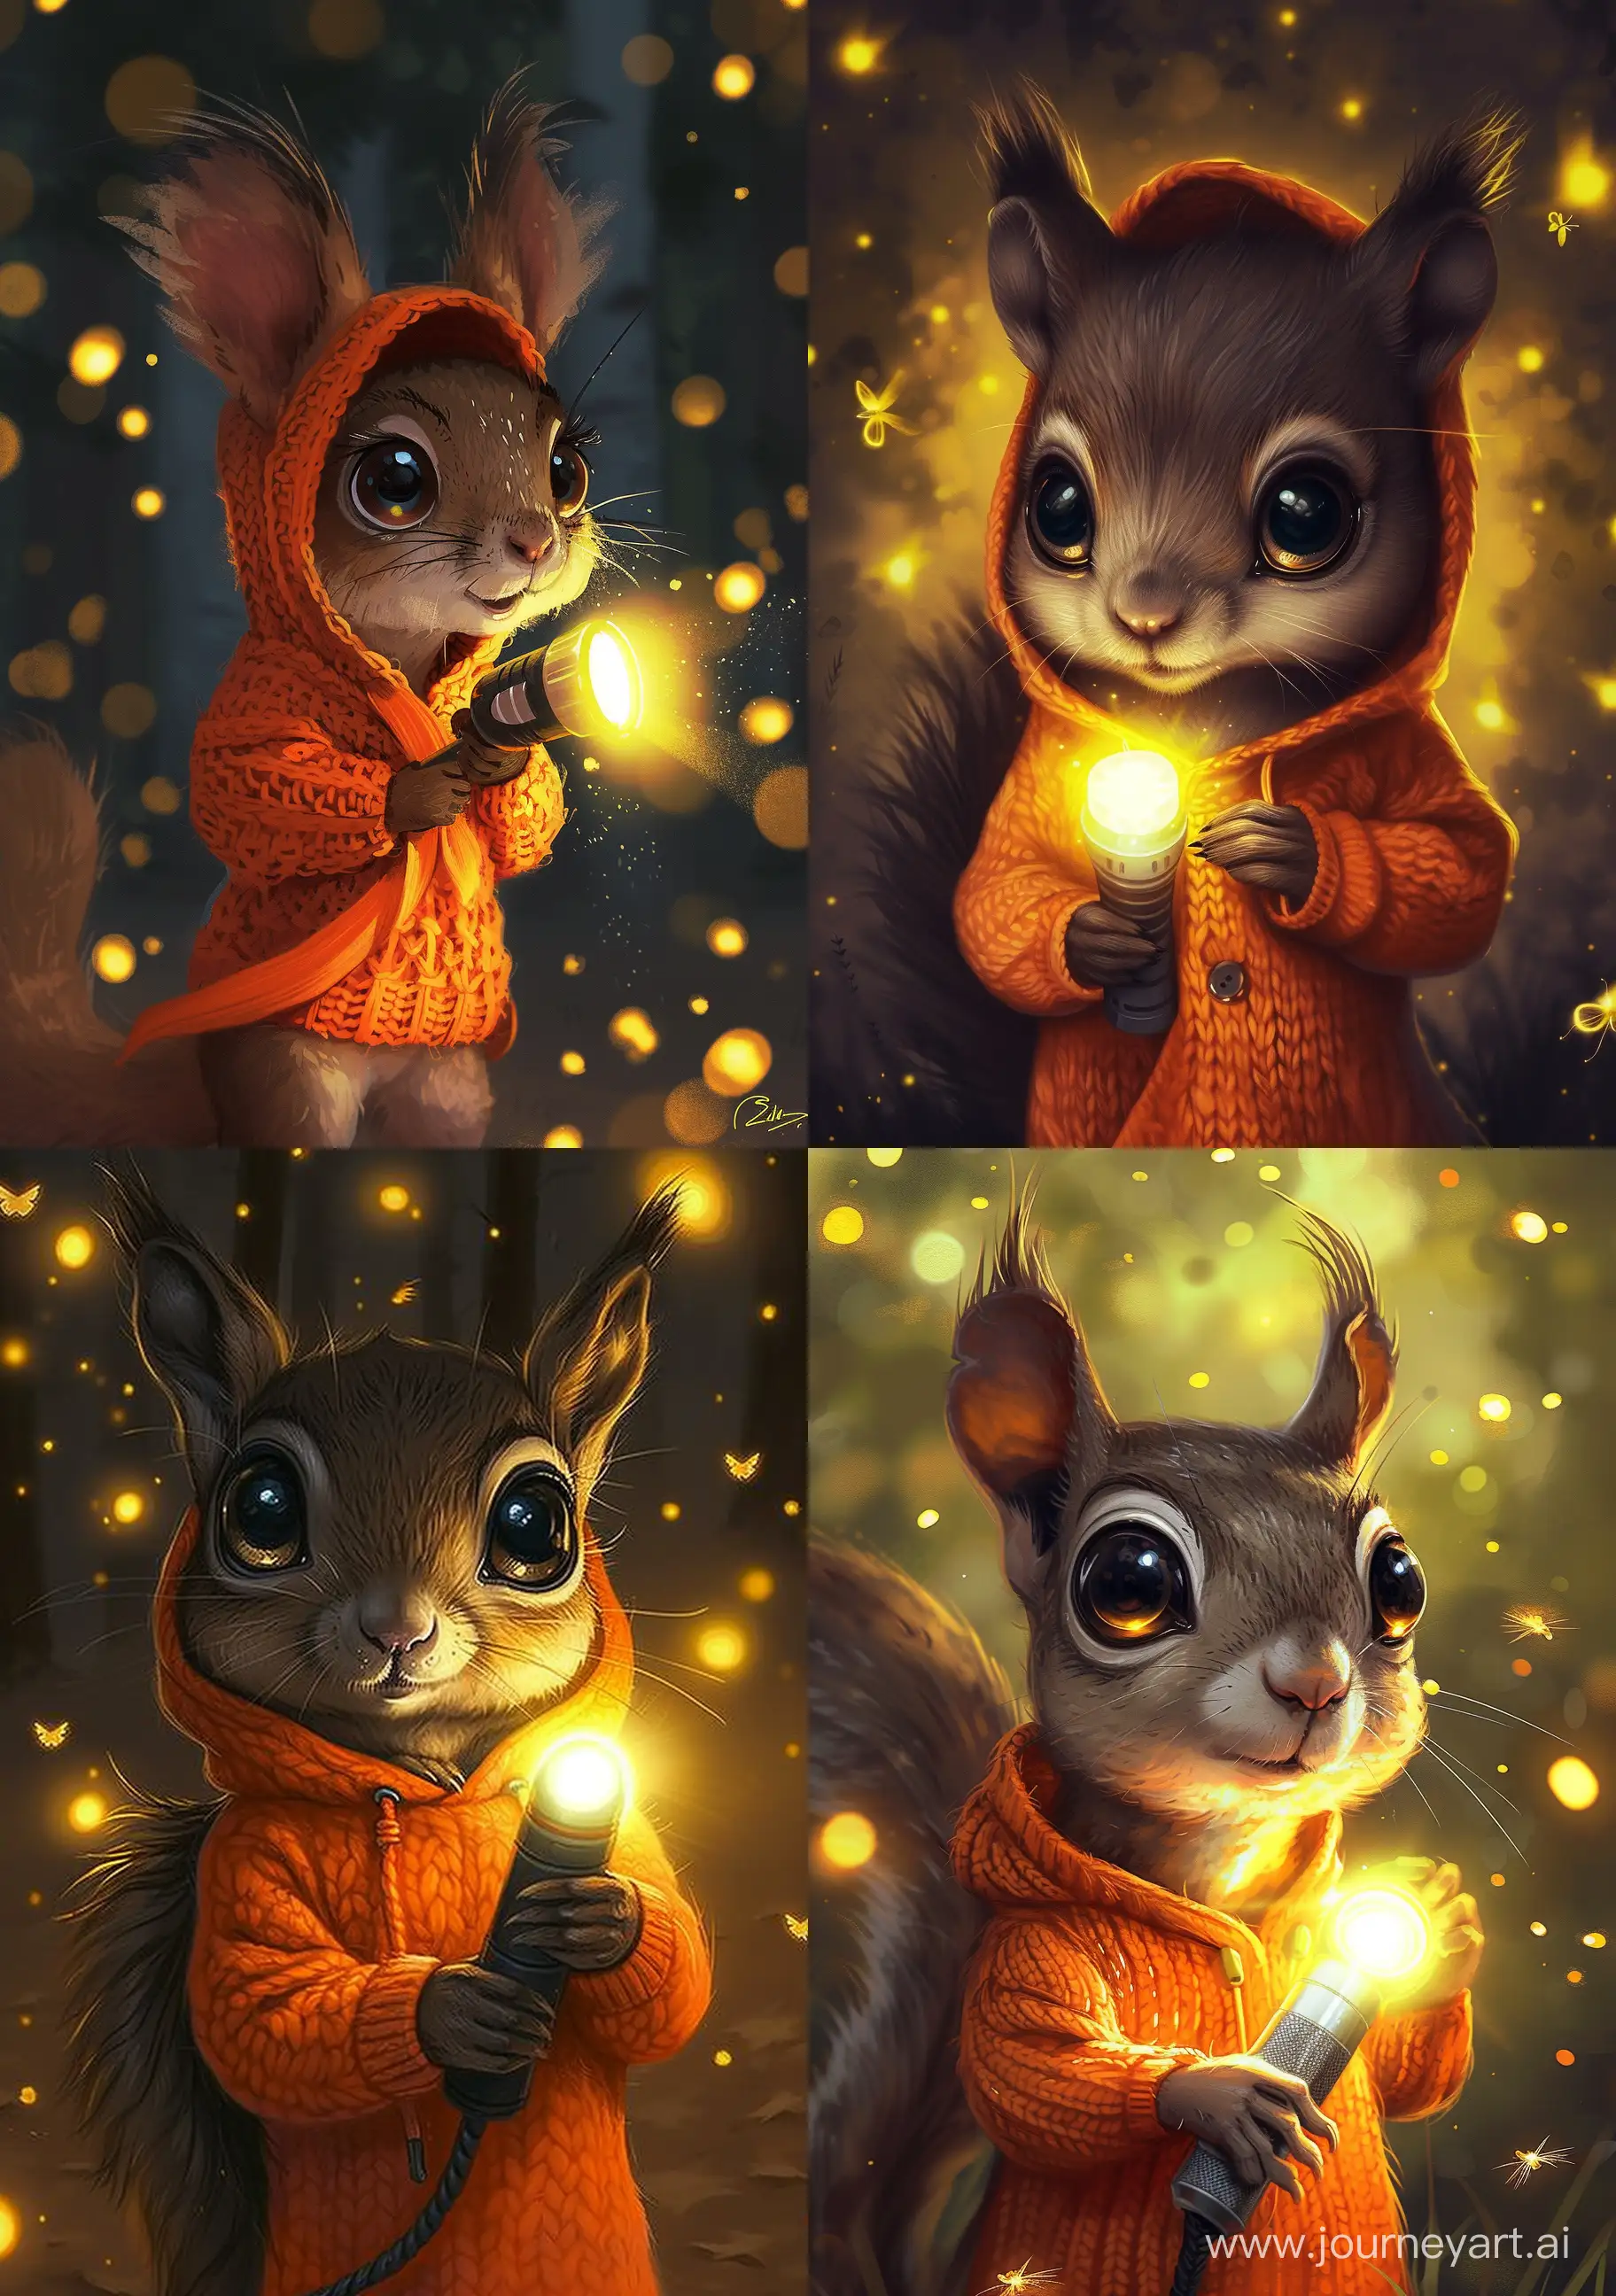 Enchanting-Little-Squirrel-with-Glowing-Flashlight-in-Neon-Hoodie